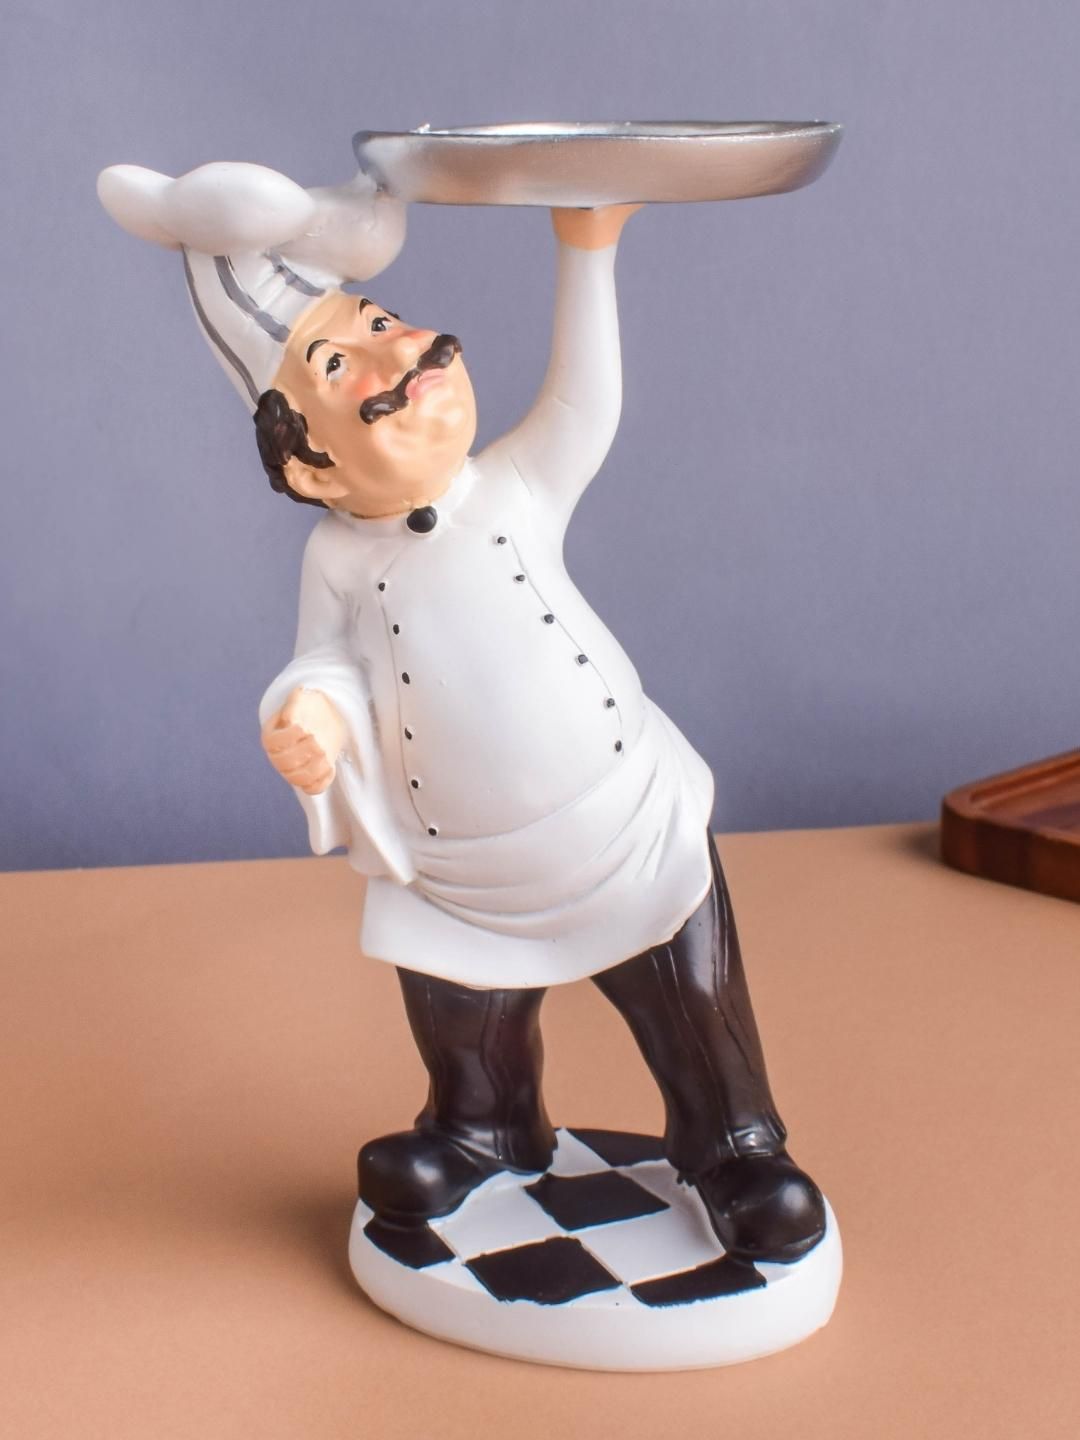 Nestasia White And Black Chef Figurine With Pan Price in India